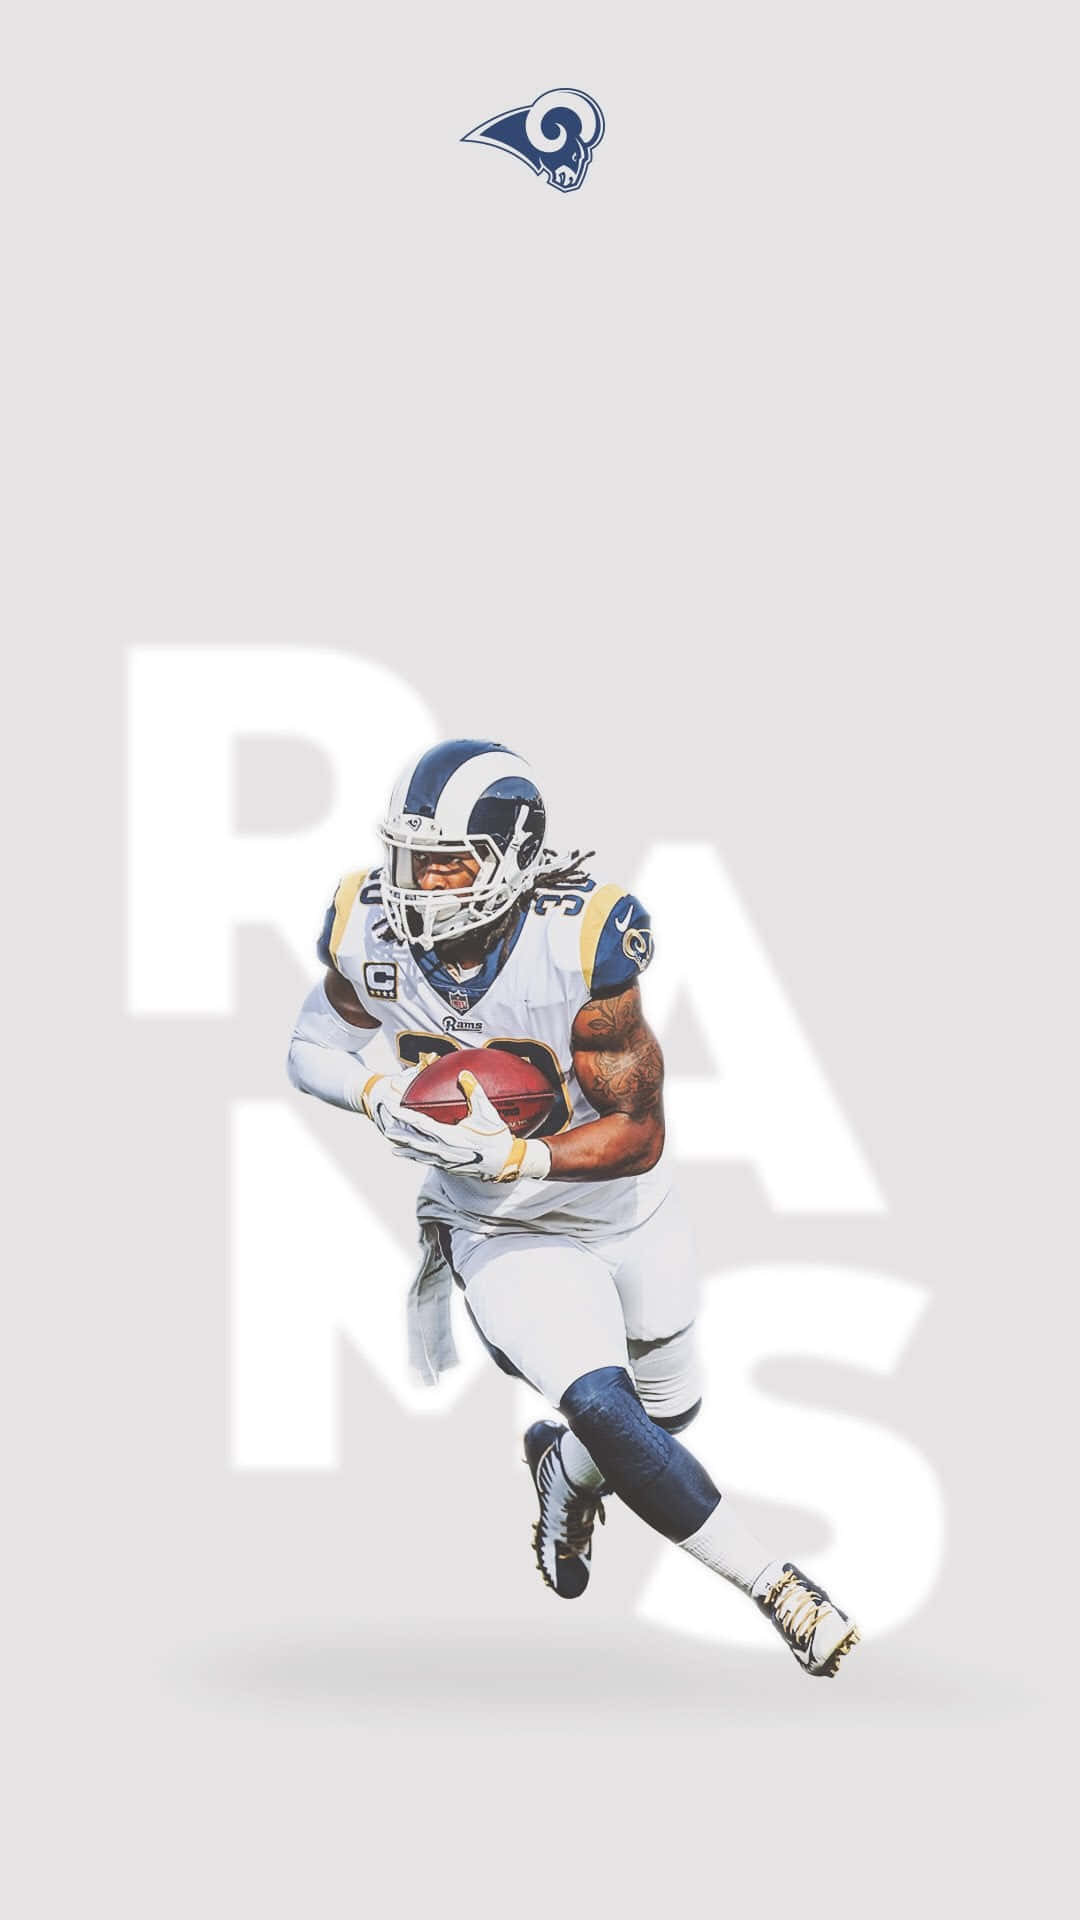 A Rams Player Running With The Ball Wallpaper